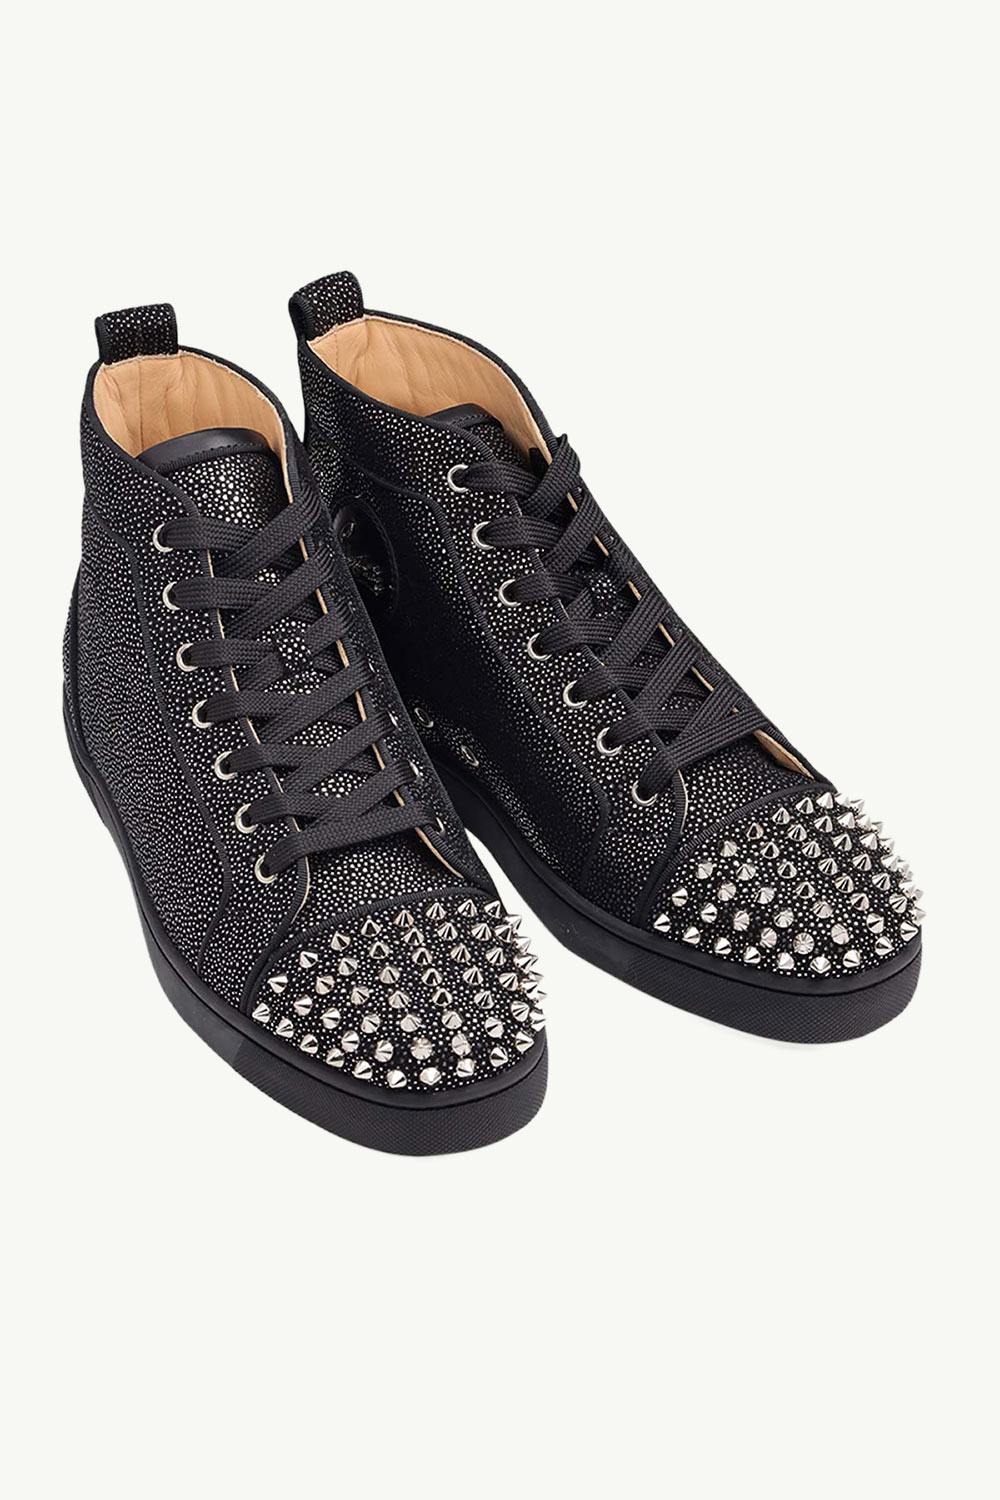 CHRISTIAN LOUBOUTIN Men Lou Spikes Orlato High Top Sneakers in Version Black Creative Leather 1